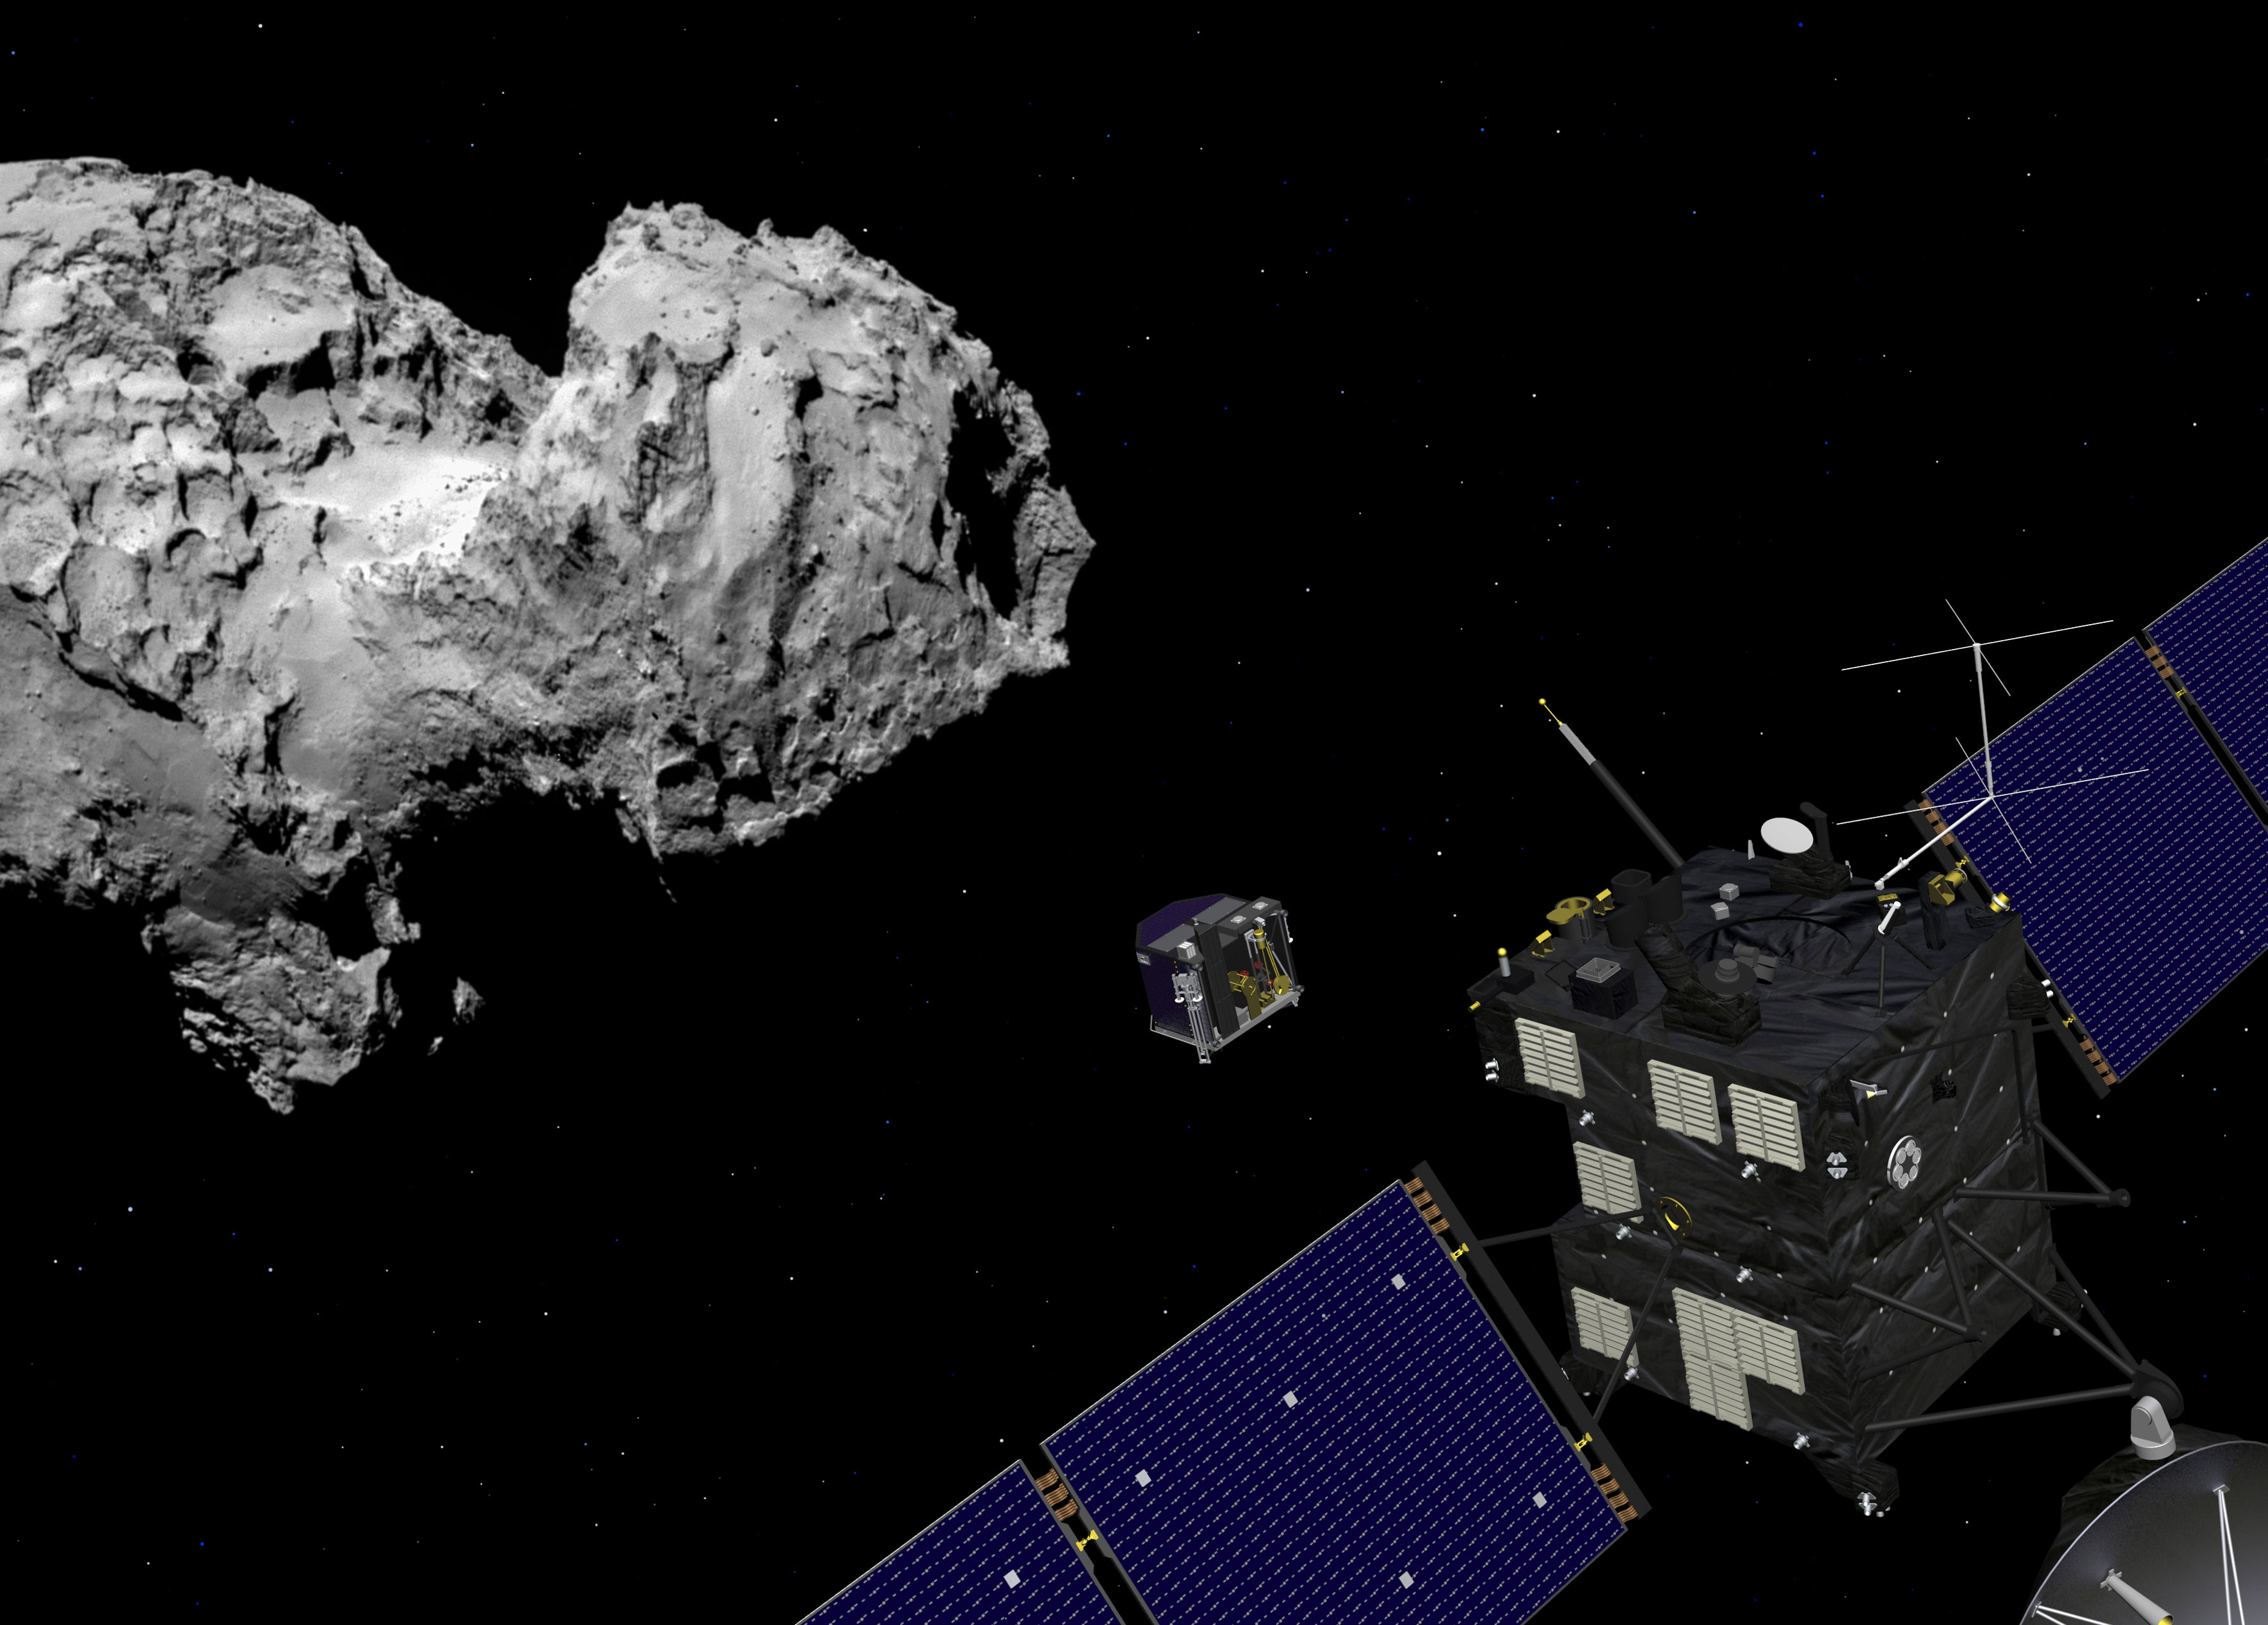 Still image from animation of Philae separating from Rosetta and descending to the surface of comet 67P/Churyumov-Gerasimenko in November 2014. Credit: ESA/ATG medialab